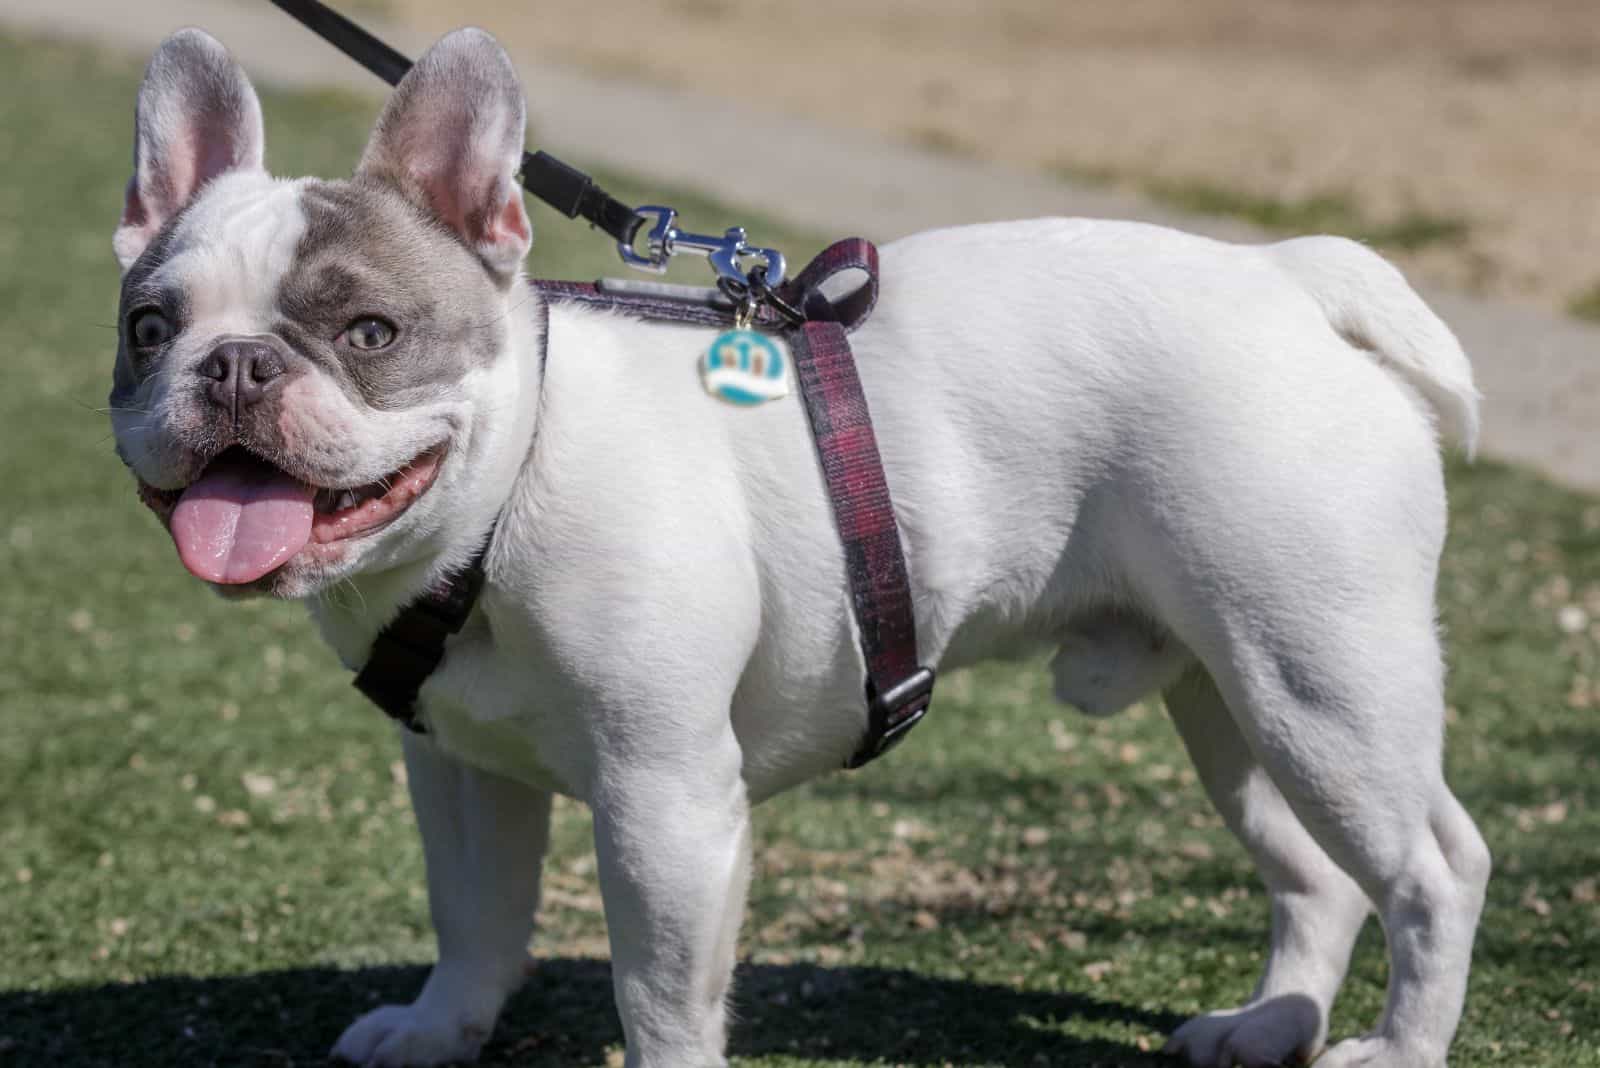 Pied French Bulldog on a leash standing on the grass